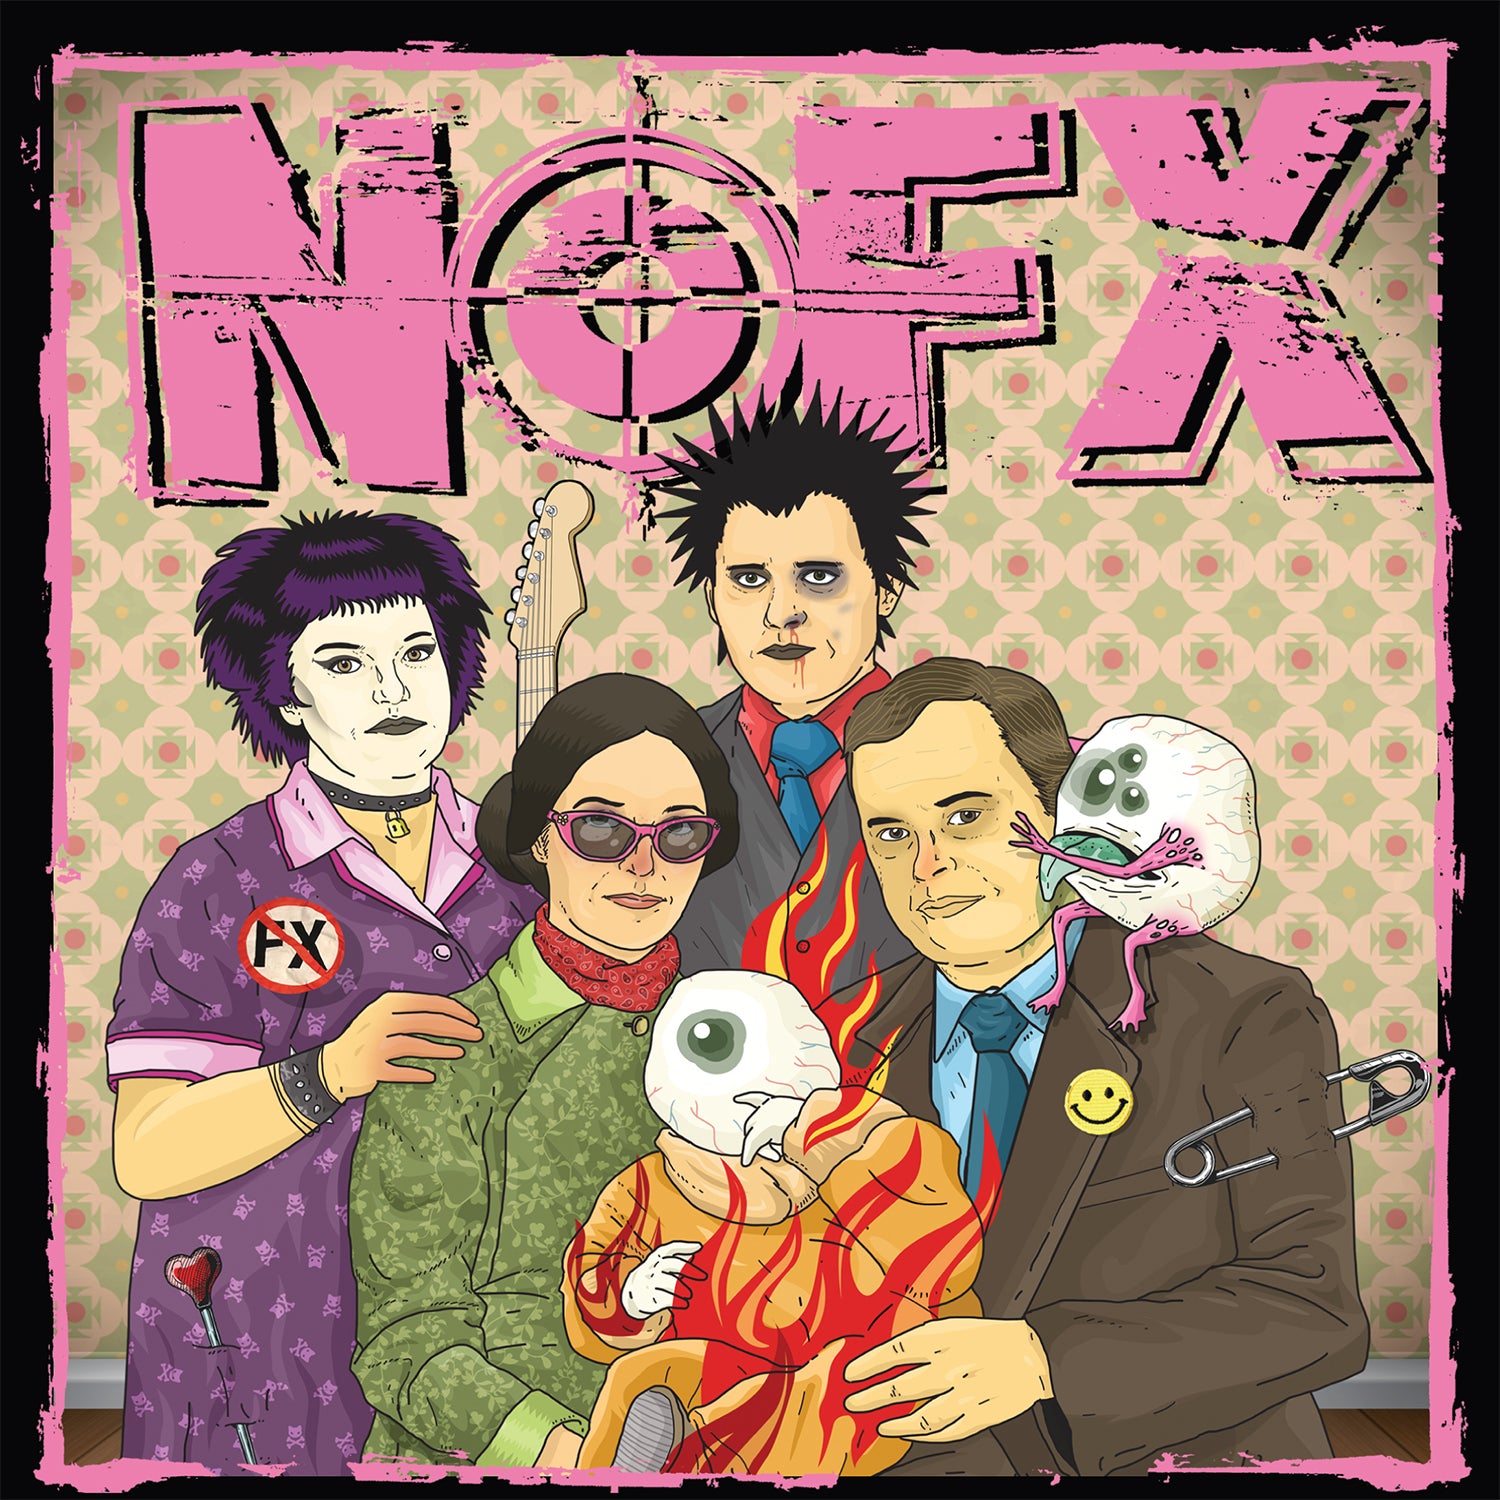 NOFX 2019 7 of the Month Club #8 COLOR VINYL Record! non single album  songs NEW